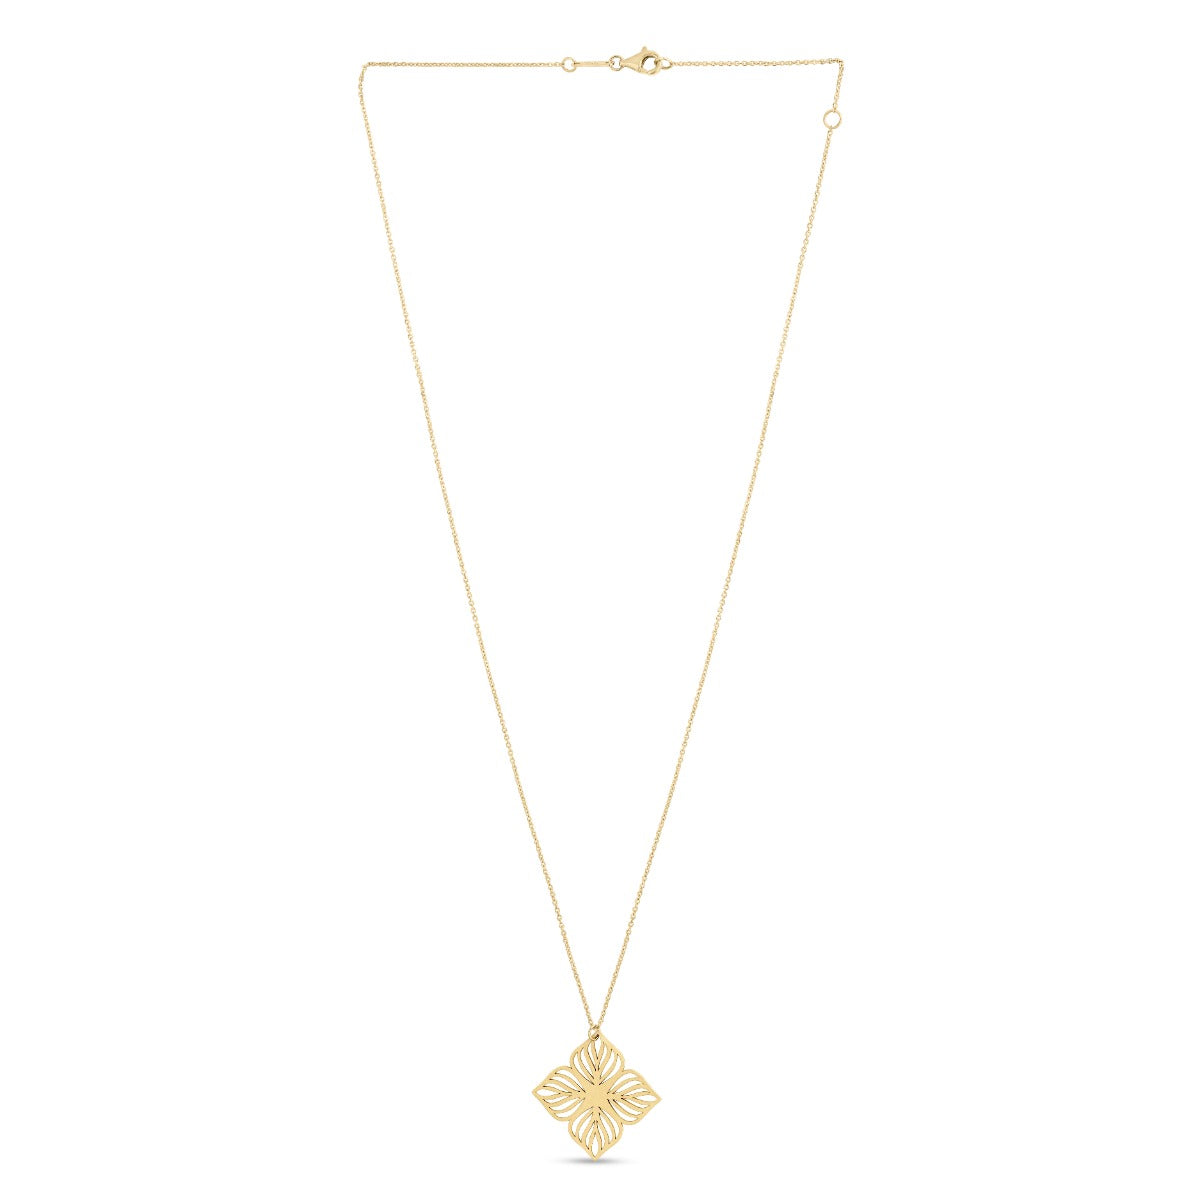 14K Gold Polished Cutout Flower Necklace with Lobster Clasp